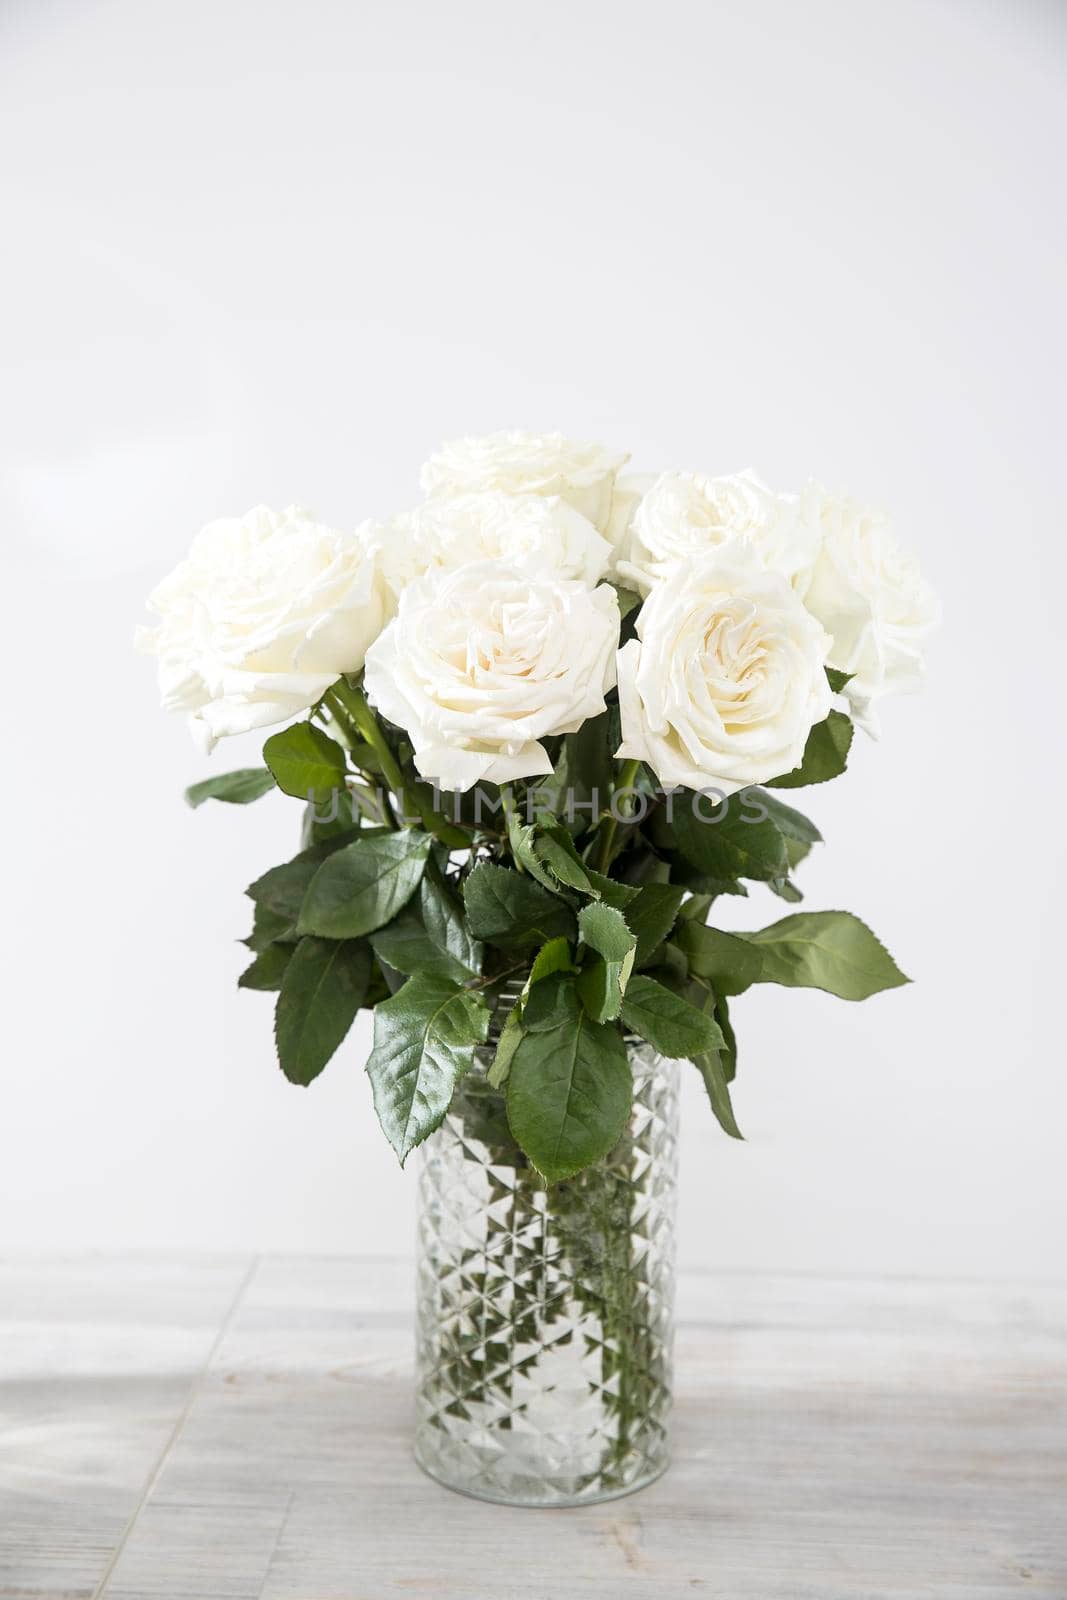 Bouquet of white roses in a glass vase on a beige table against a gray wall. Copy space. A place for text.